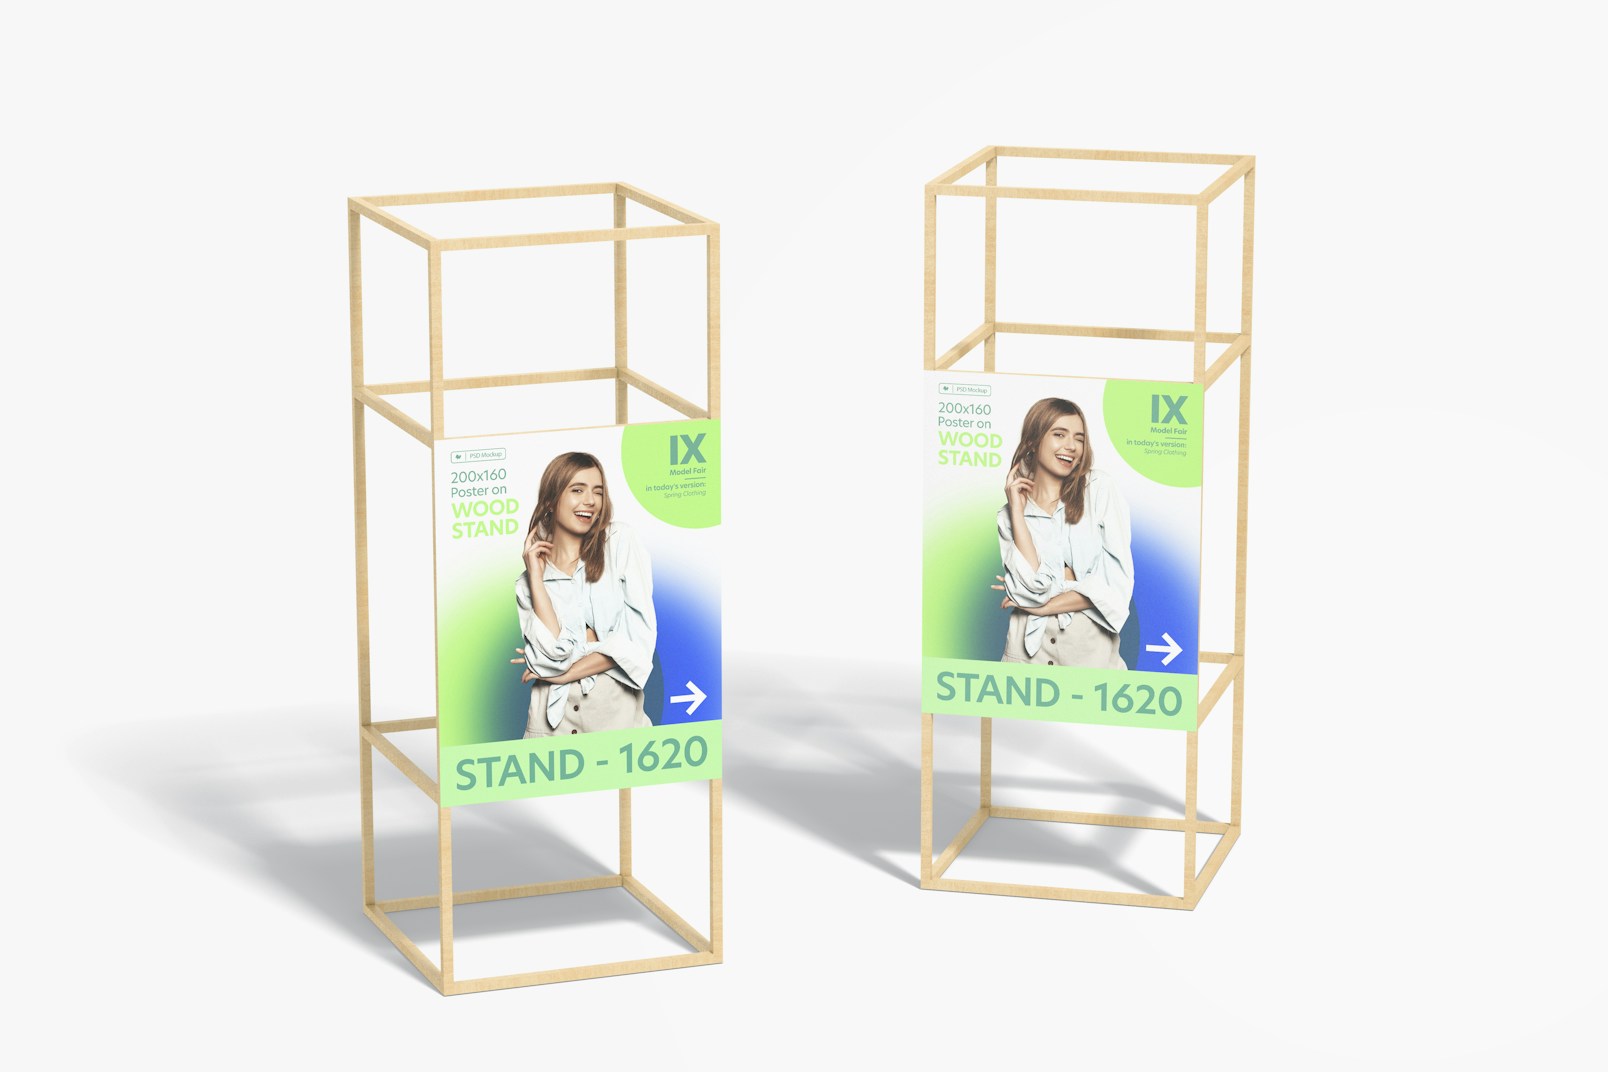 200x160 Posters on Wood Stands Mockup